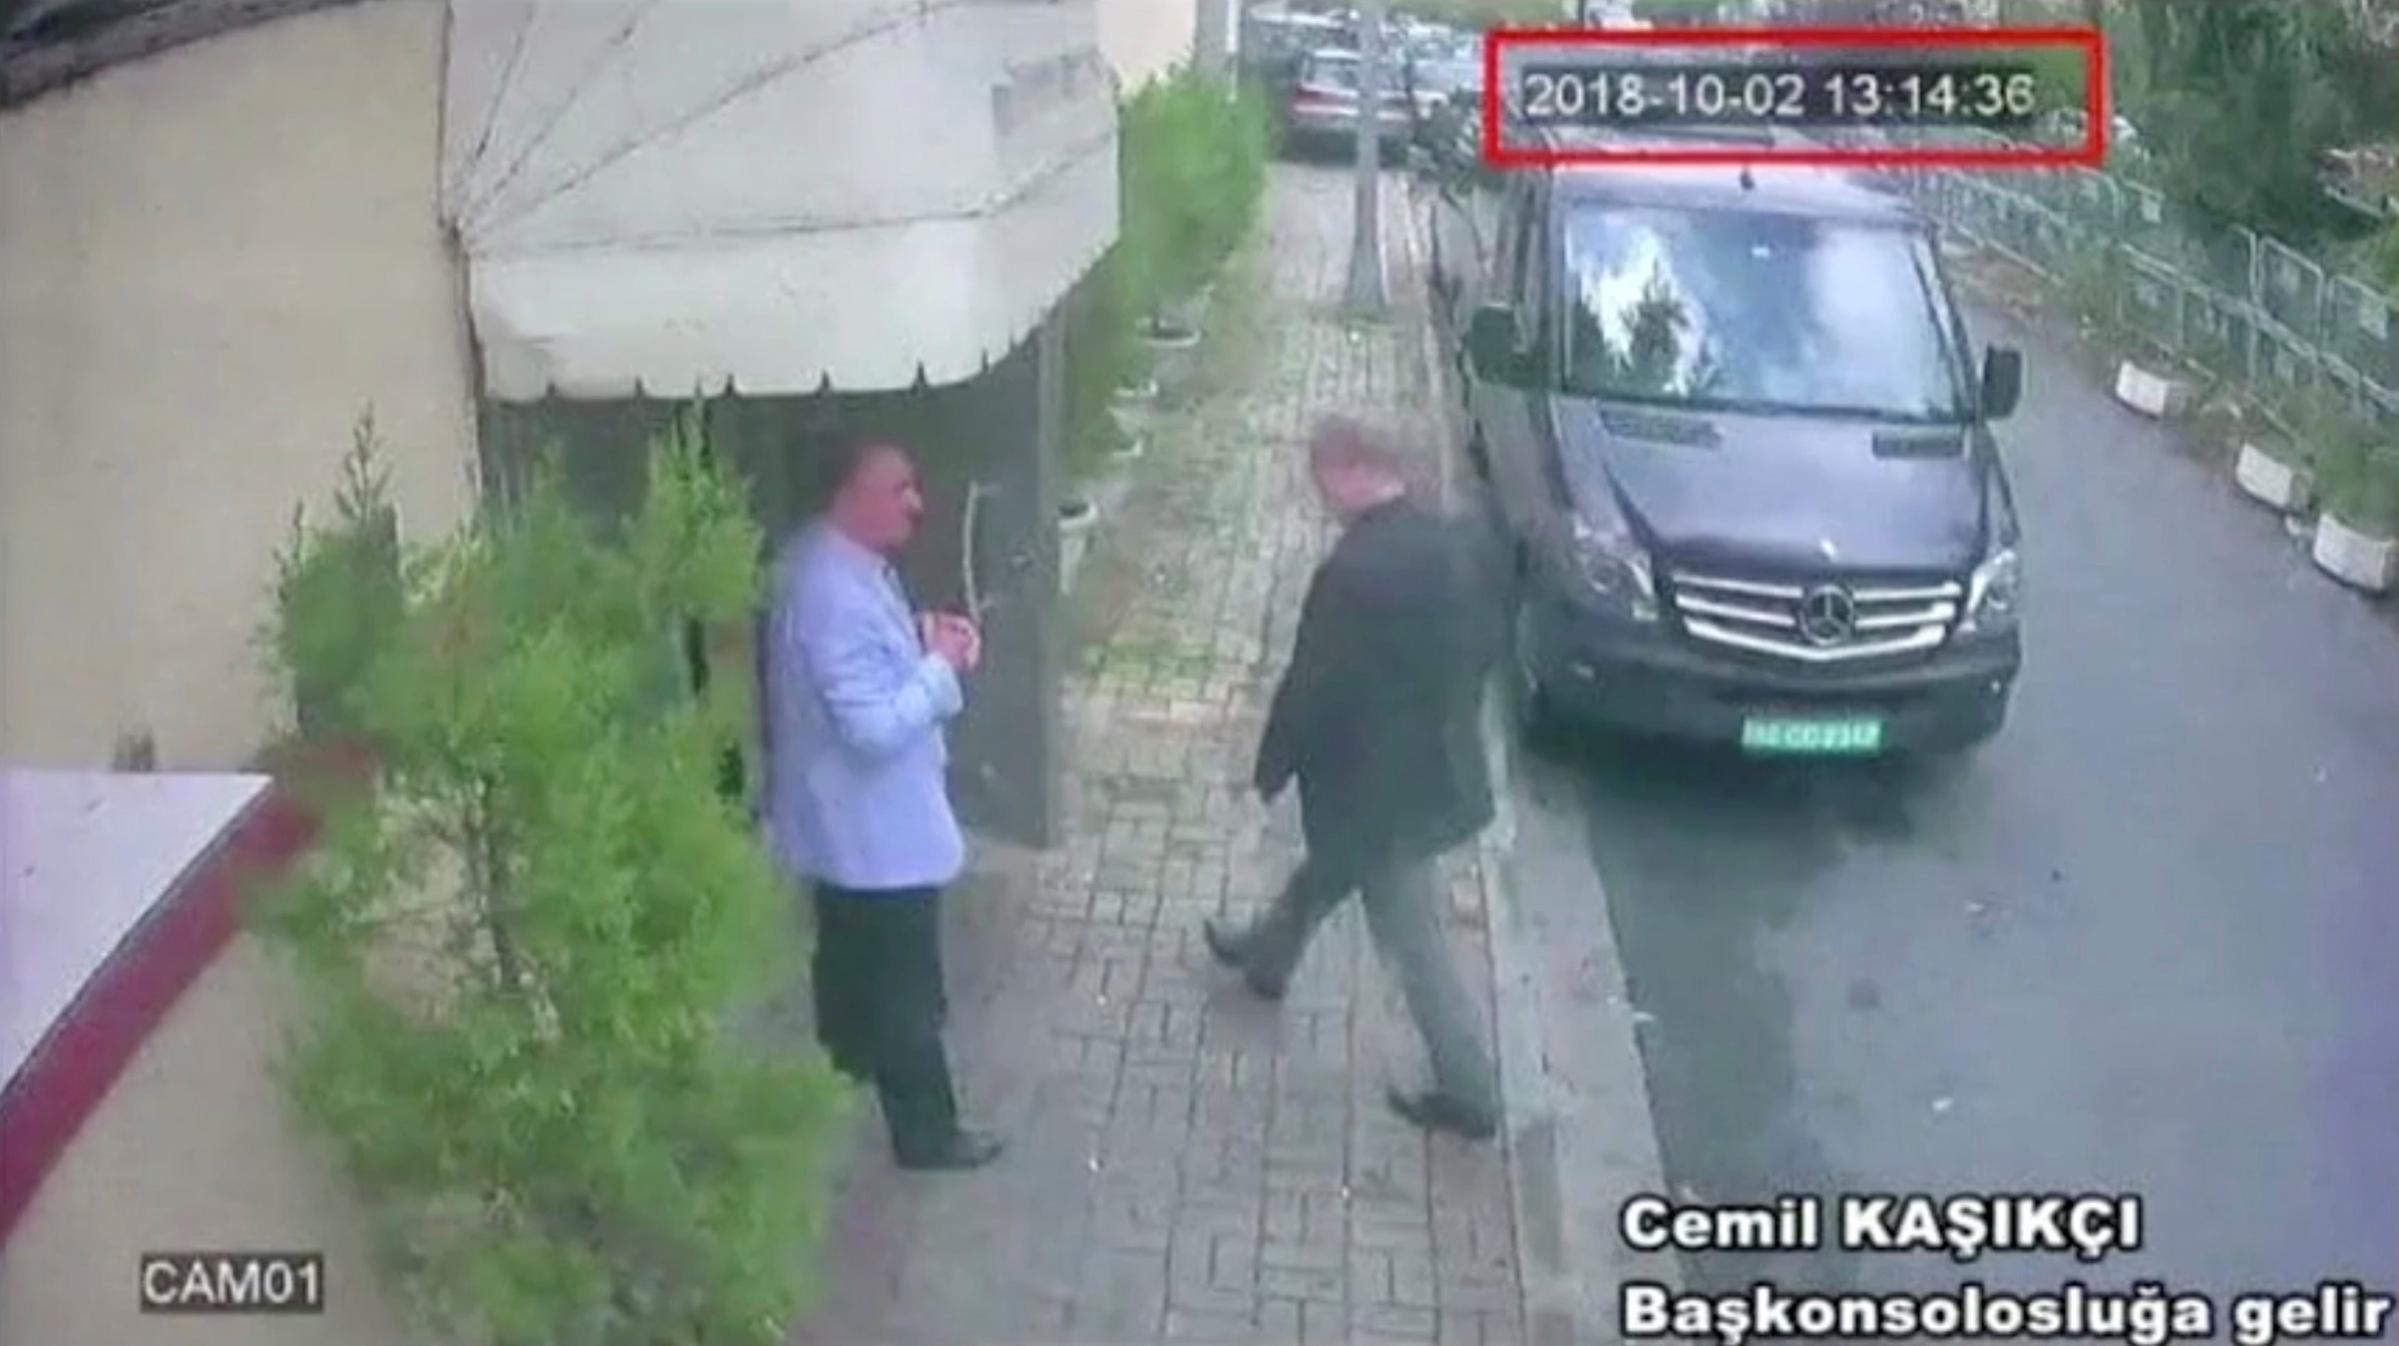 CCTV footage from Oct. 2 shows a Saudi jet at Istanbul’s Ataturk airport, suspects at the airport and Khashoggi entering the Saudi consulate that day